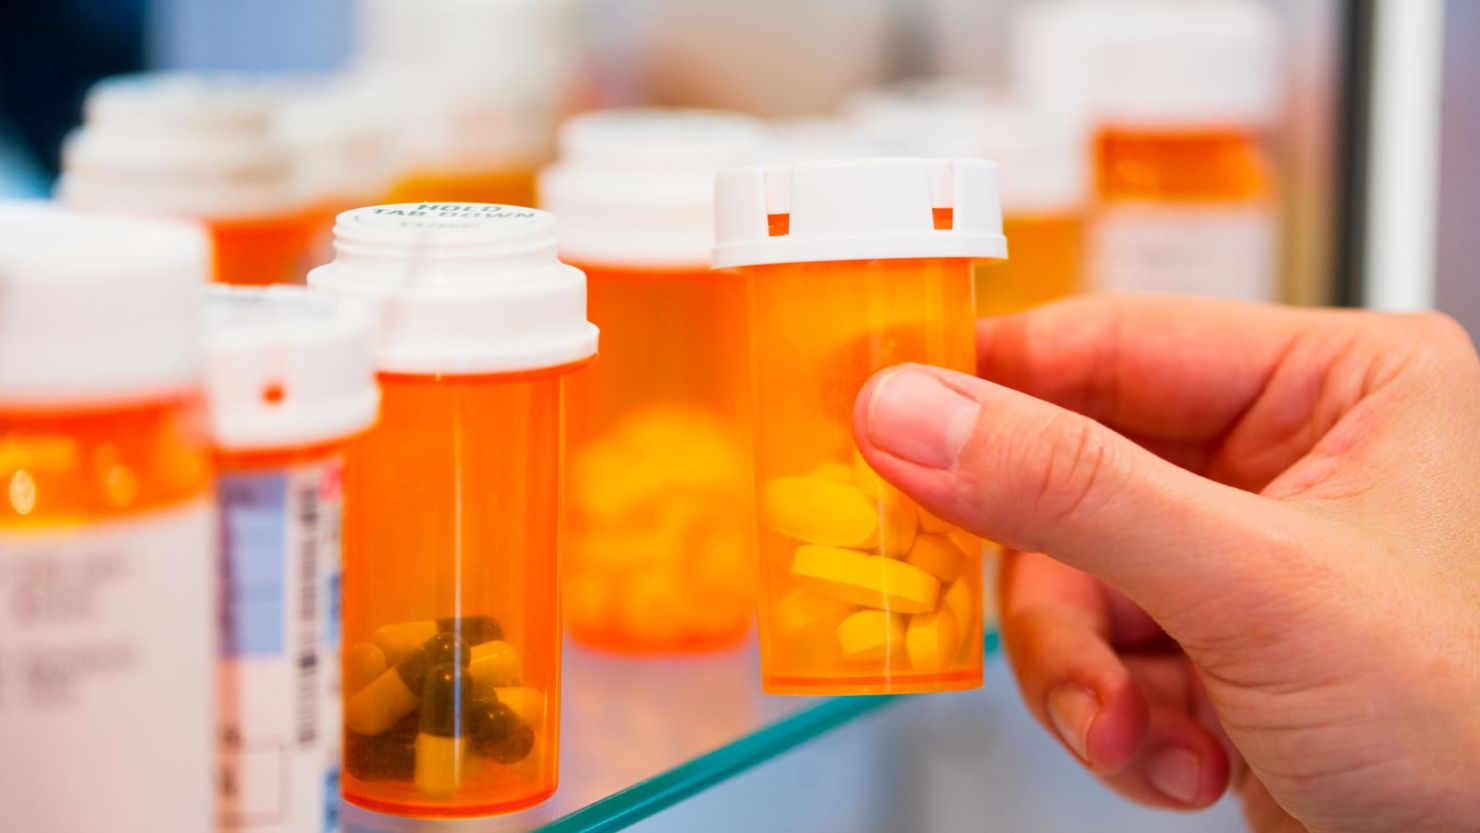 The Food and Drug Administration has approved Florida's drug importation proposal.